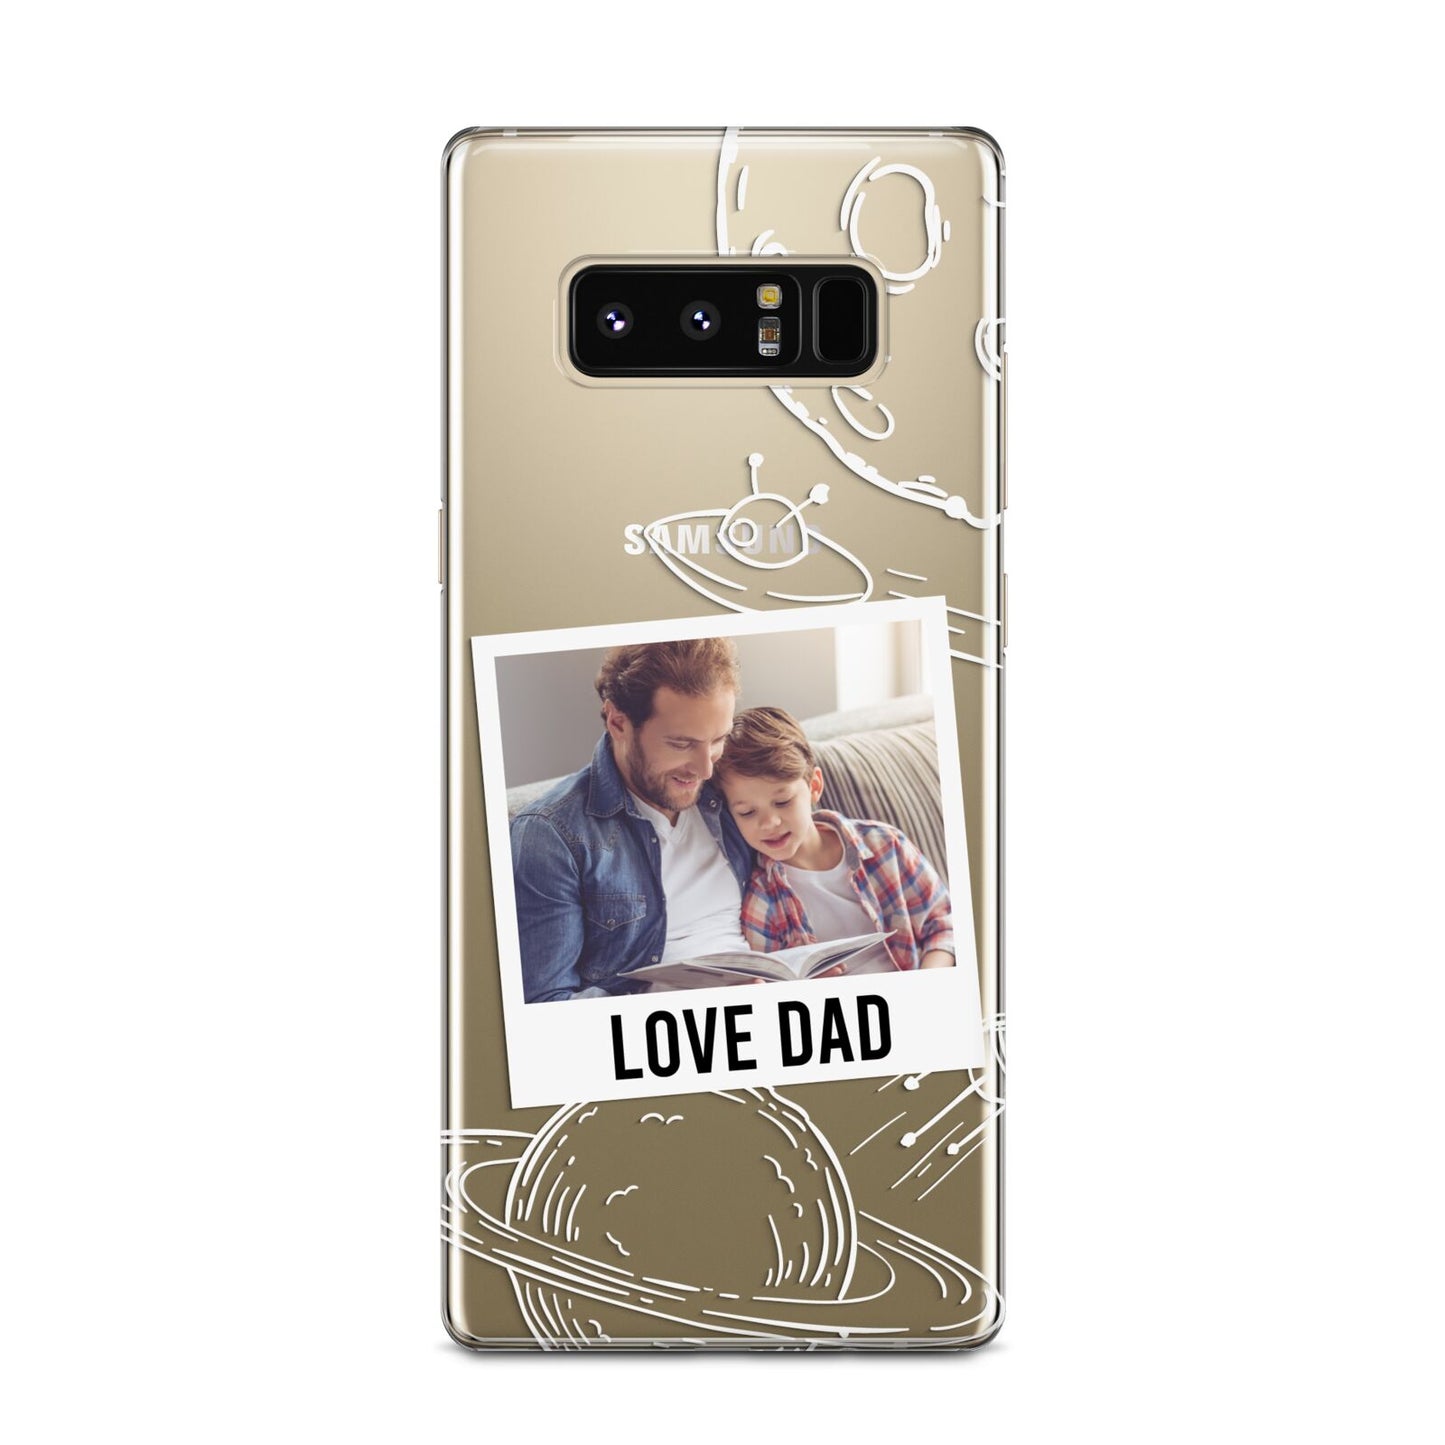 Personalised From Dad Photo Samsung Galaxy Note 8 Case